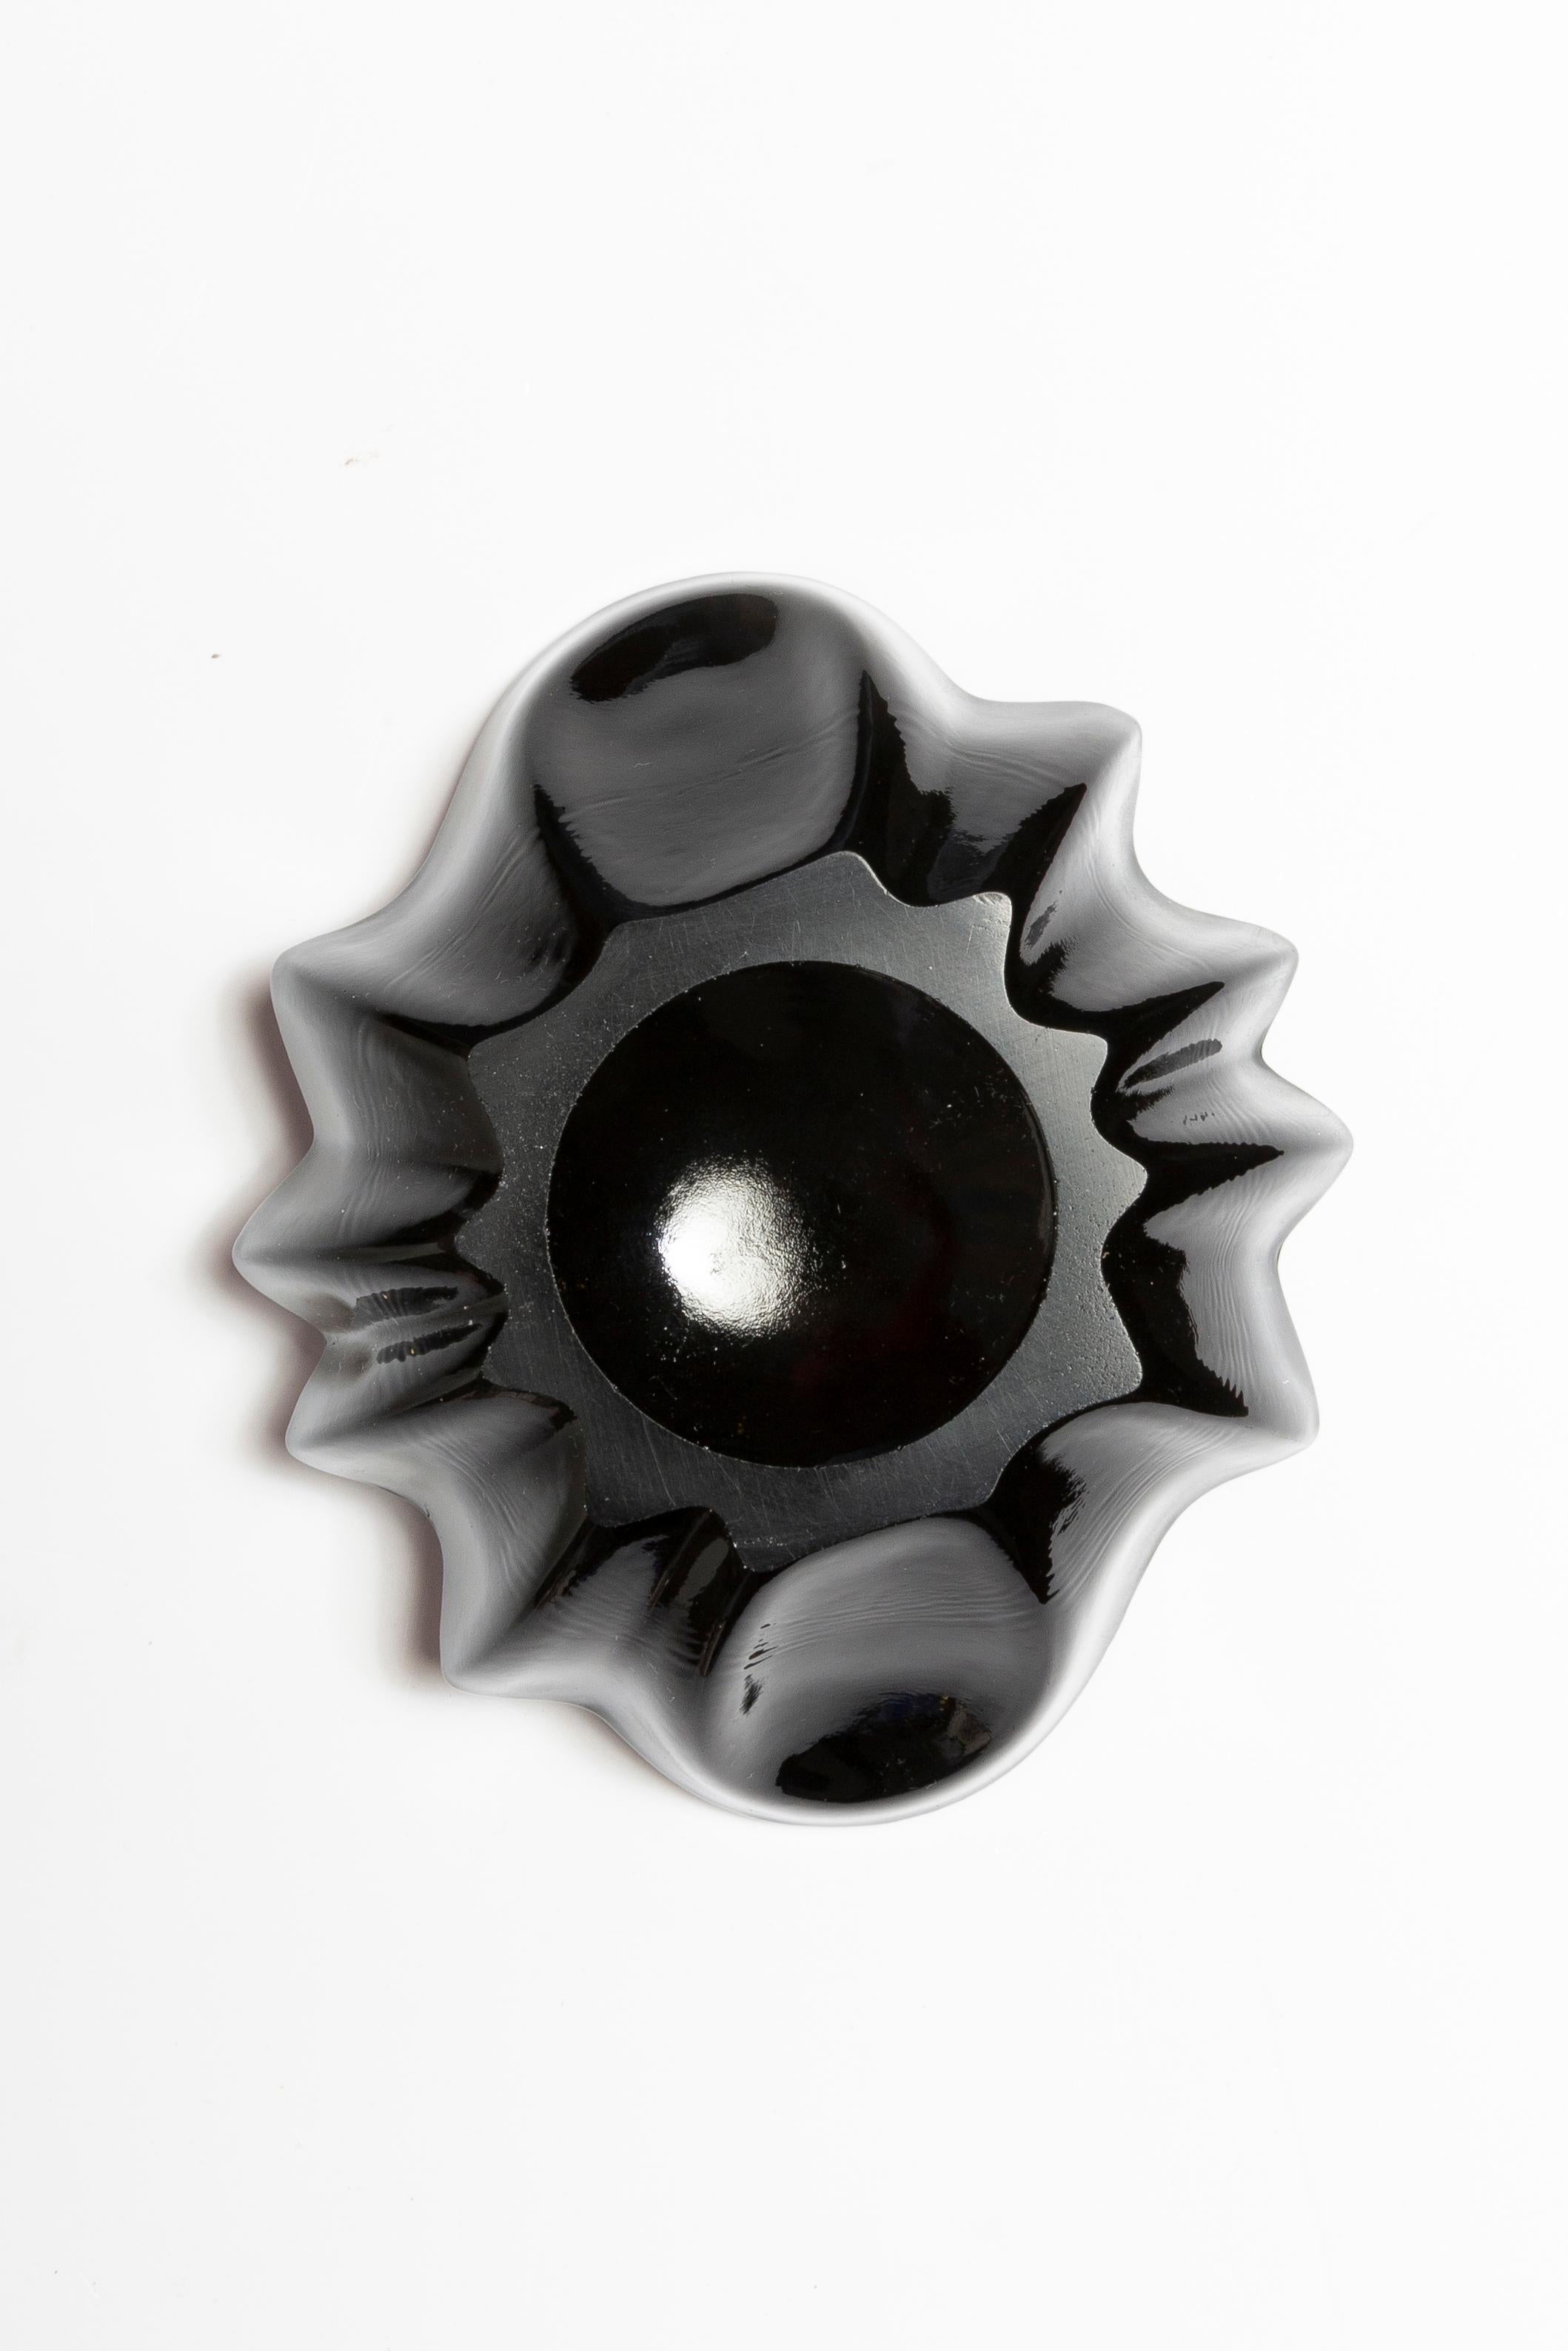 20th Century Mid Century Black Small Glass Bowl Ashtray Element, Italy, 1970s For Sale